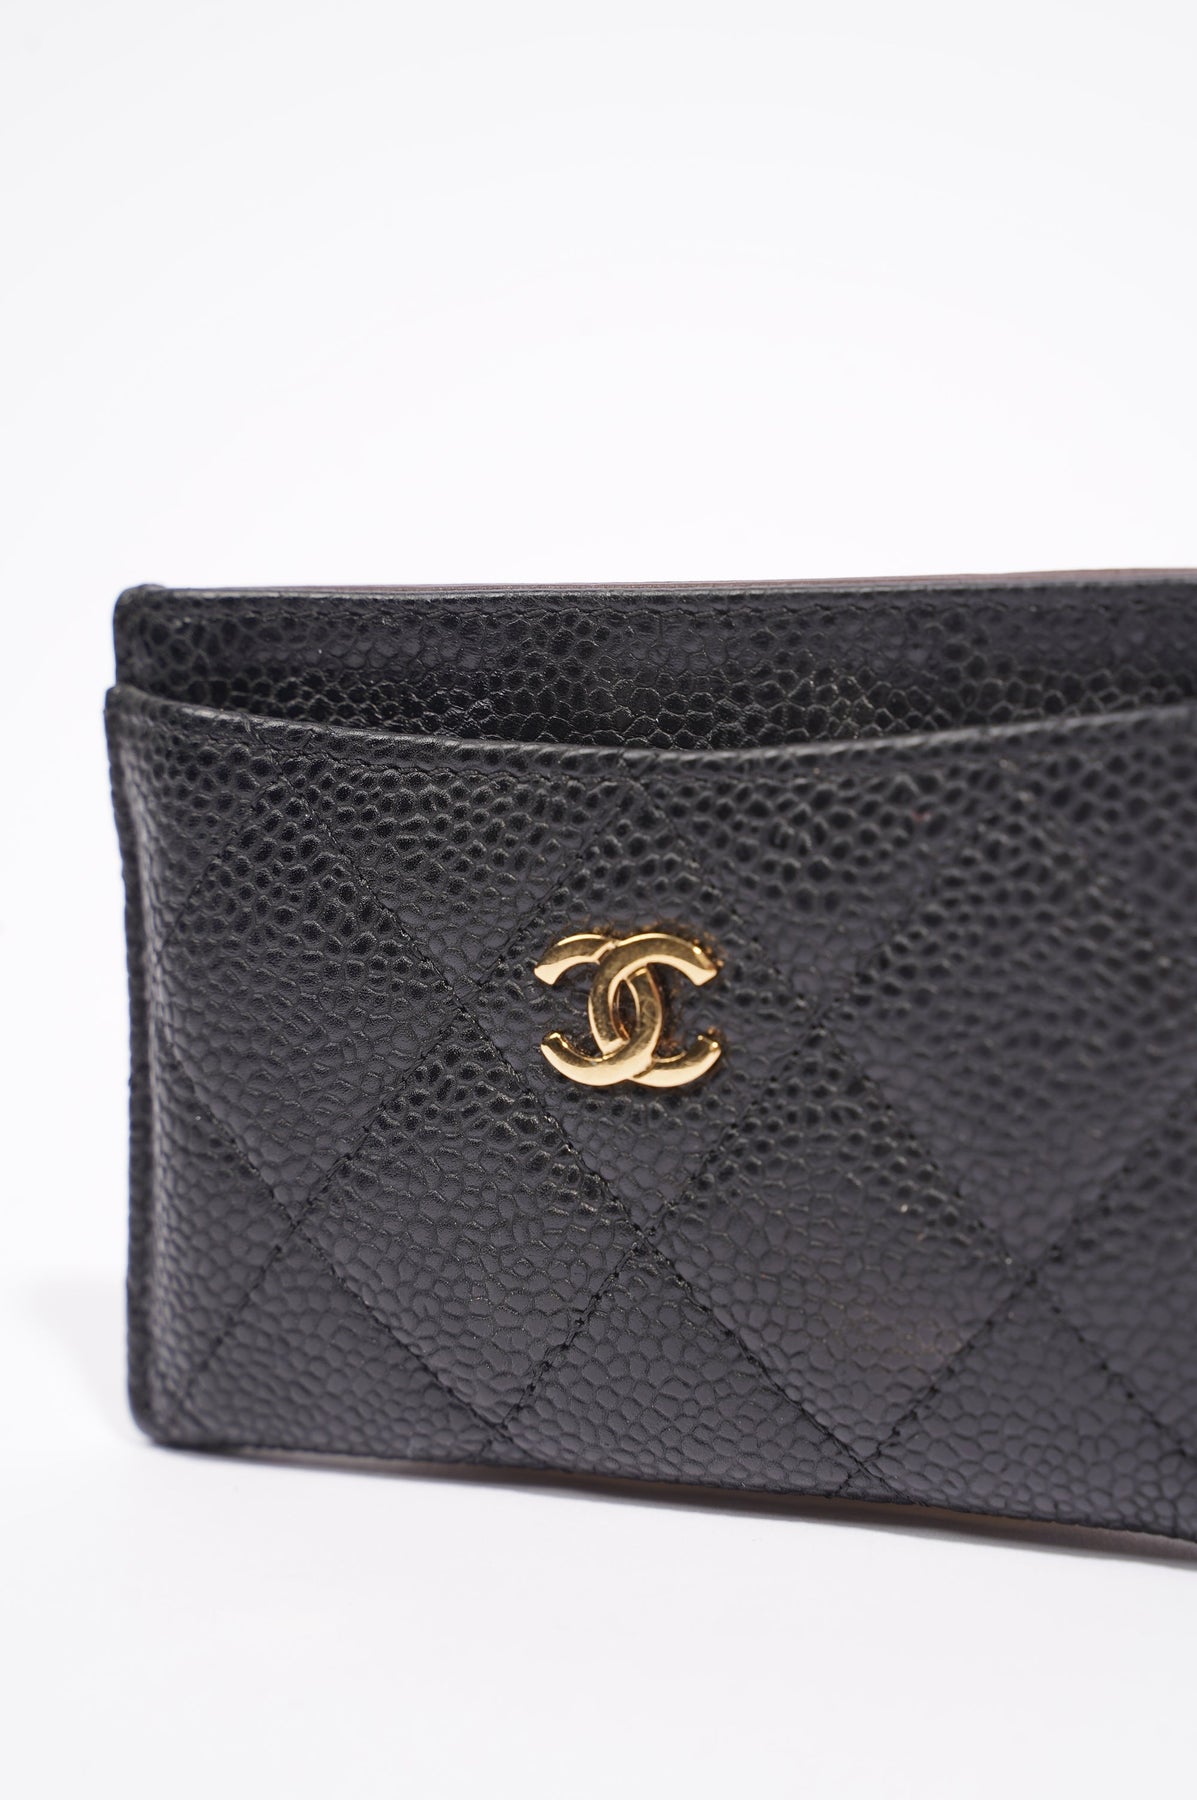 Chanel Womens Coin Cases, Black